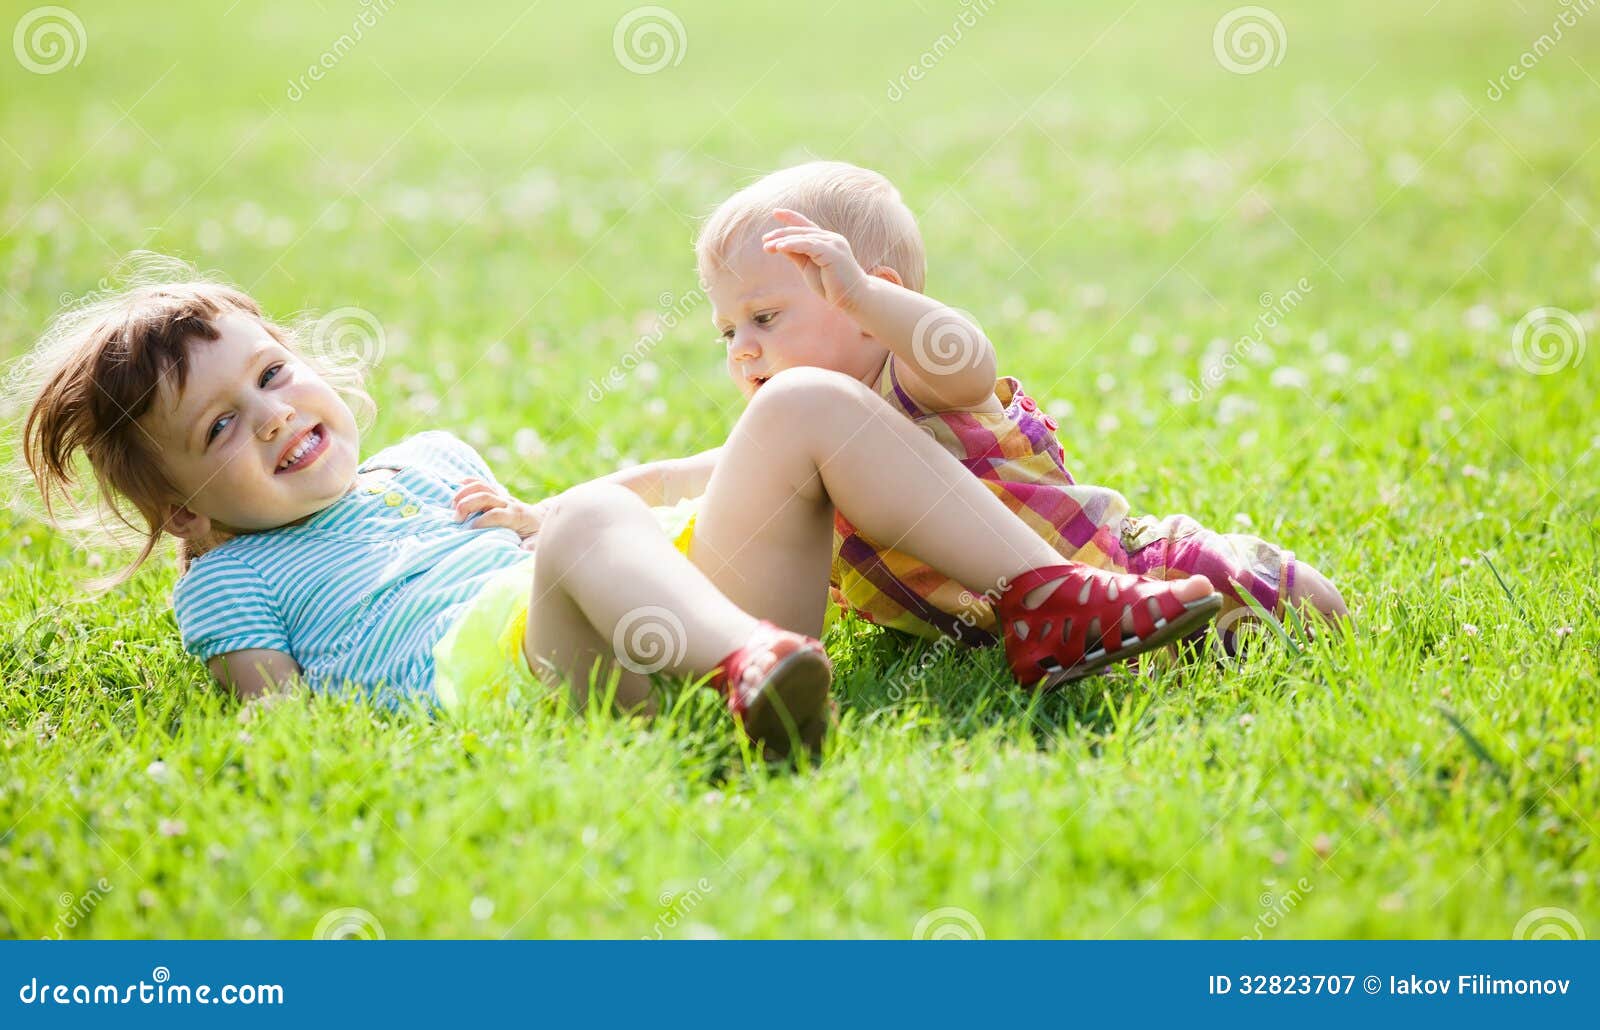 Happy Children Playing in Grass Stock Image - Image of playng, playful